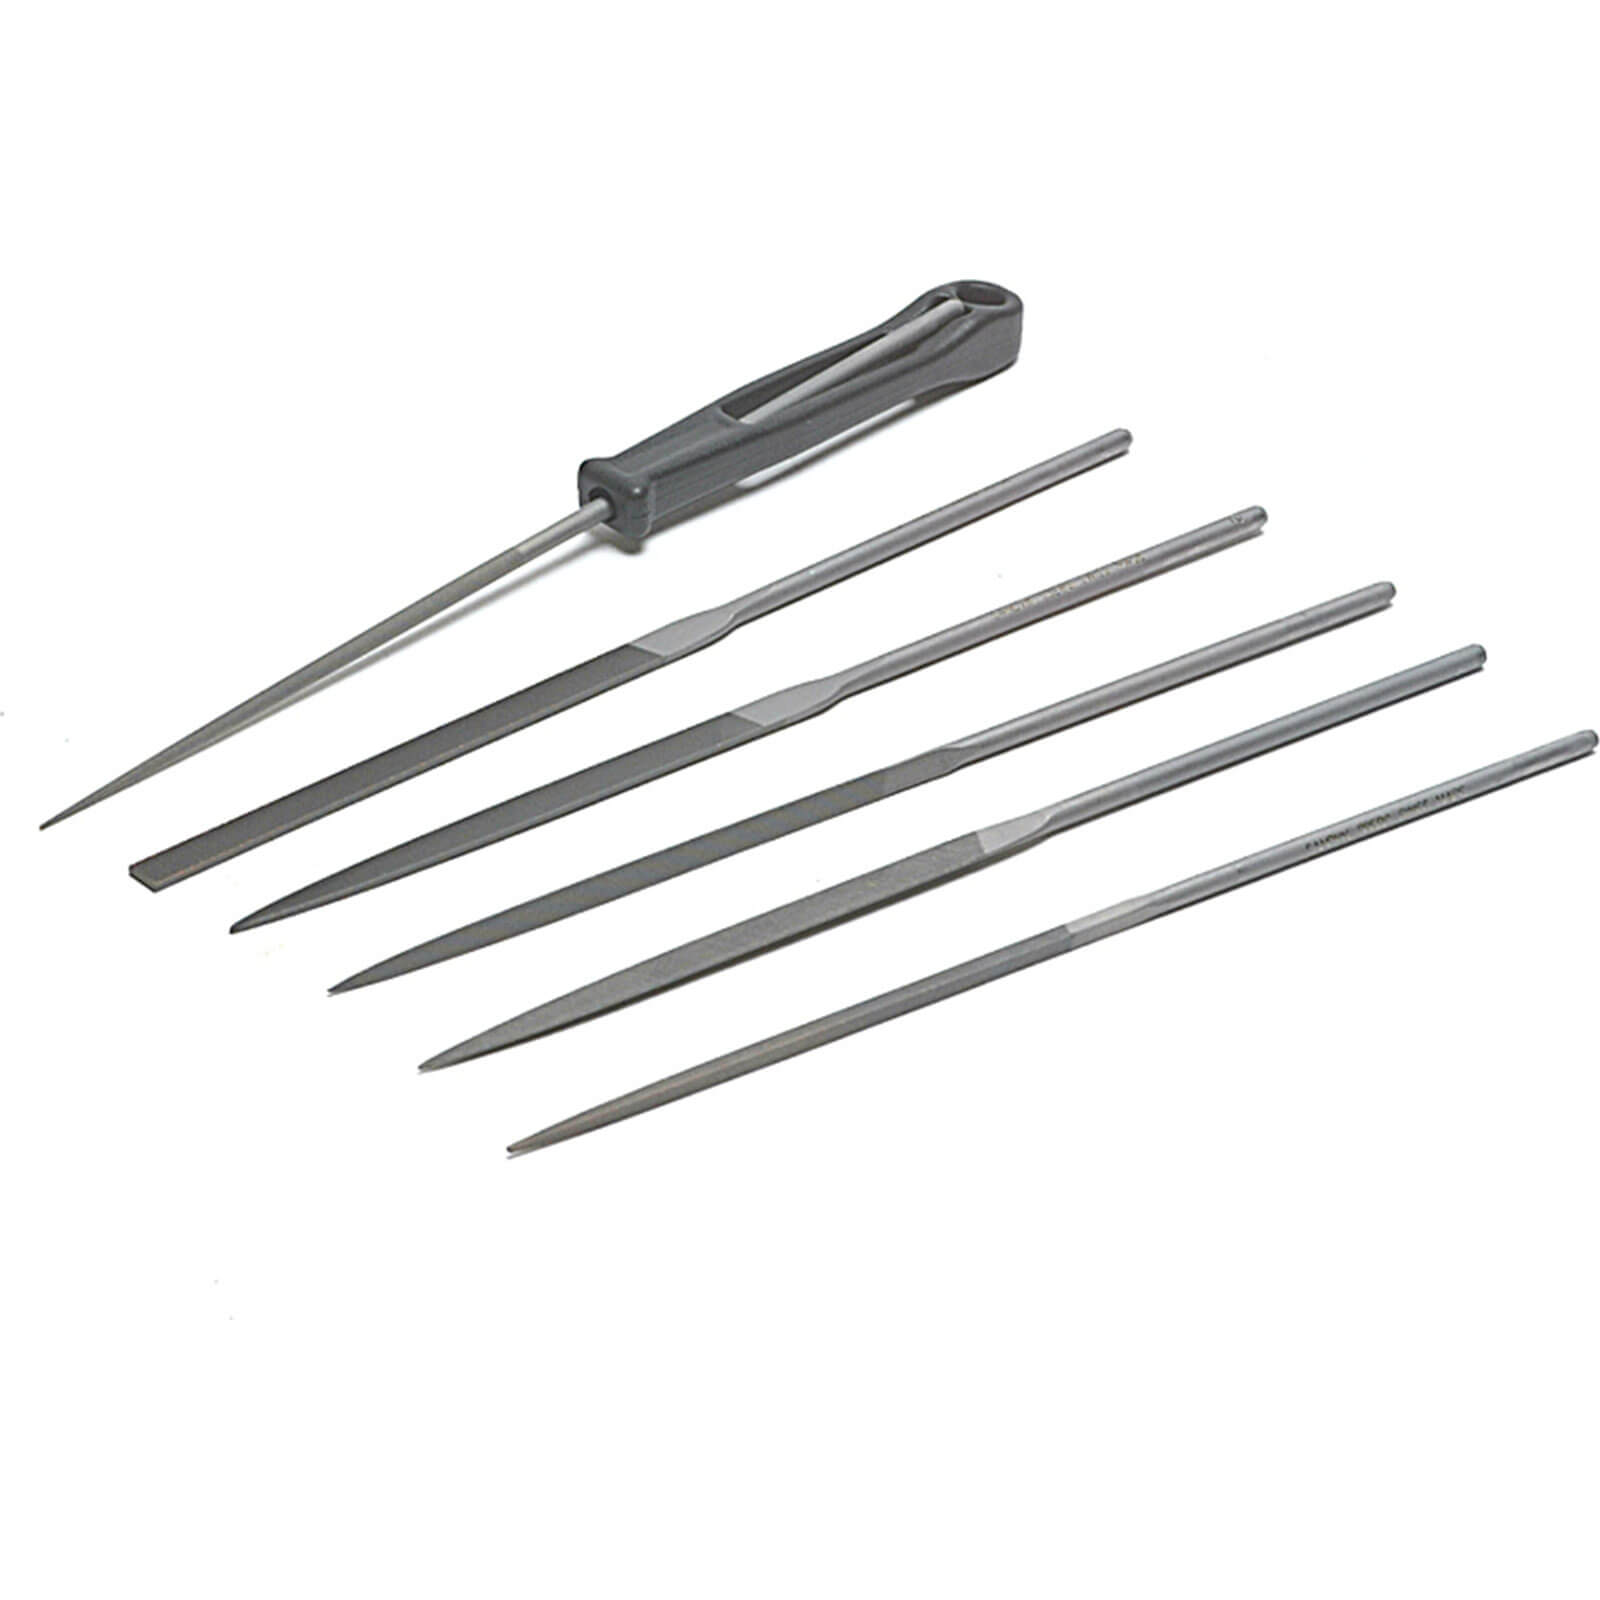 Photo of Bahco 6 Piece Precision Needle File Set In Plastic Wallet